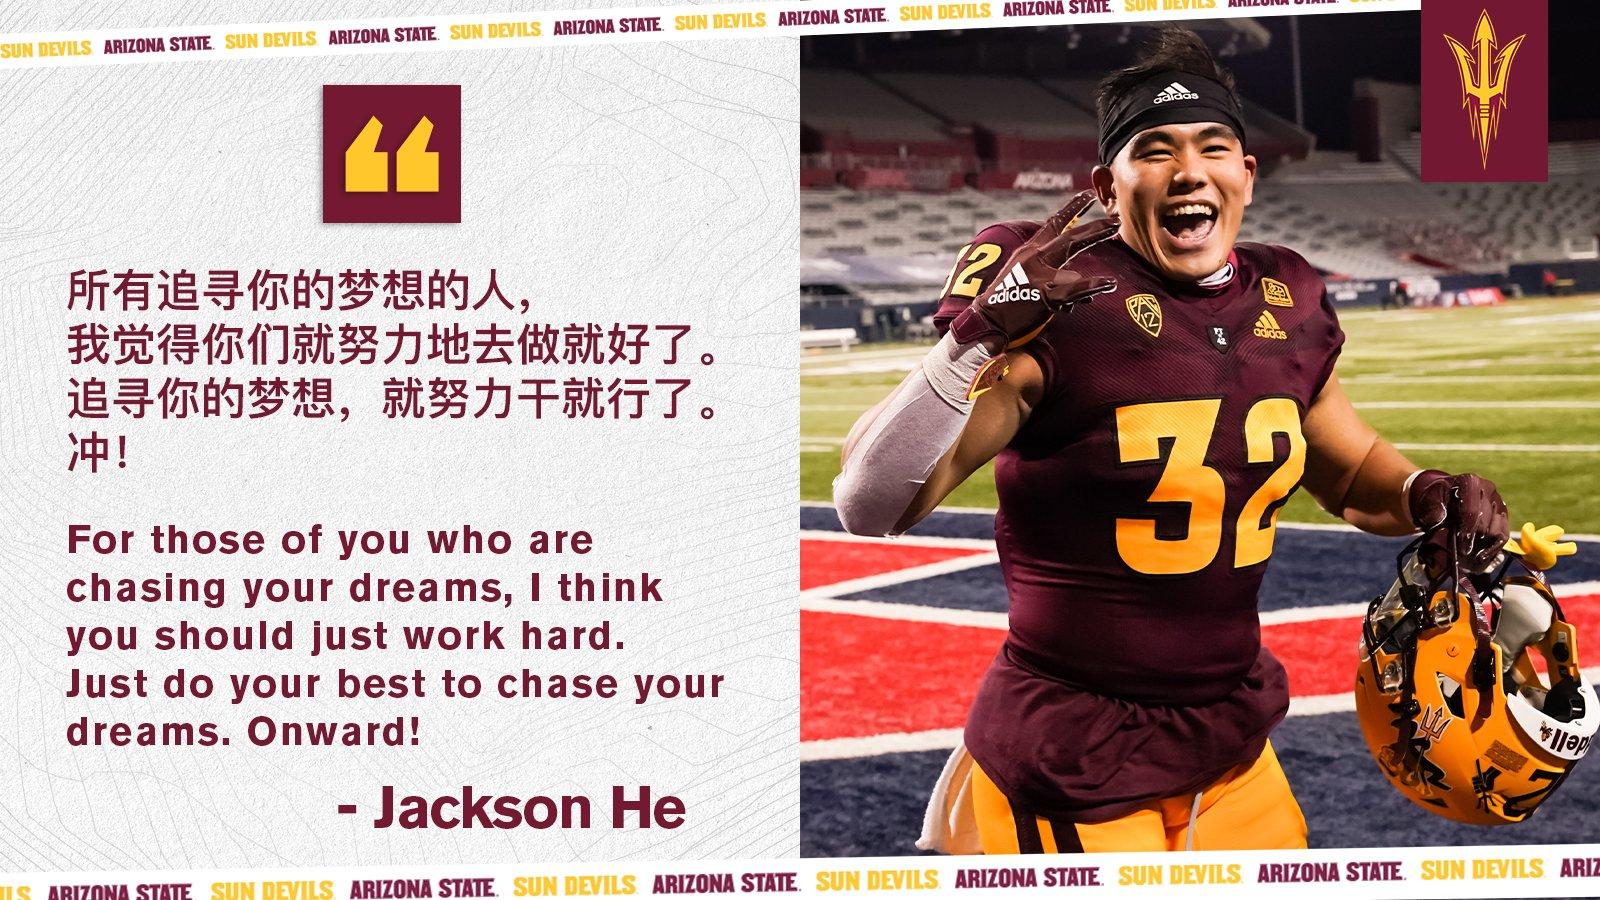 Jackson He quote and image